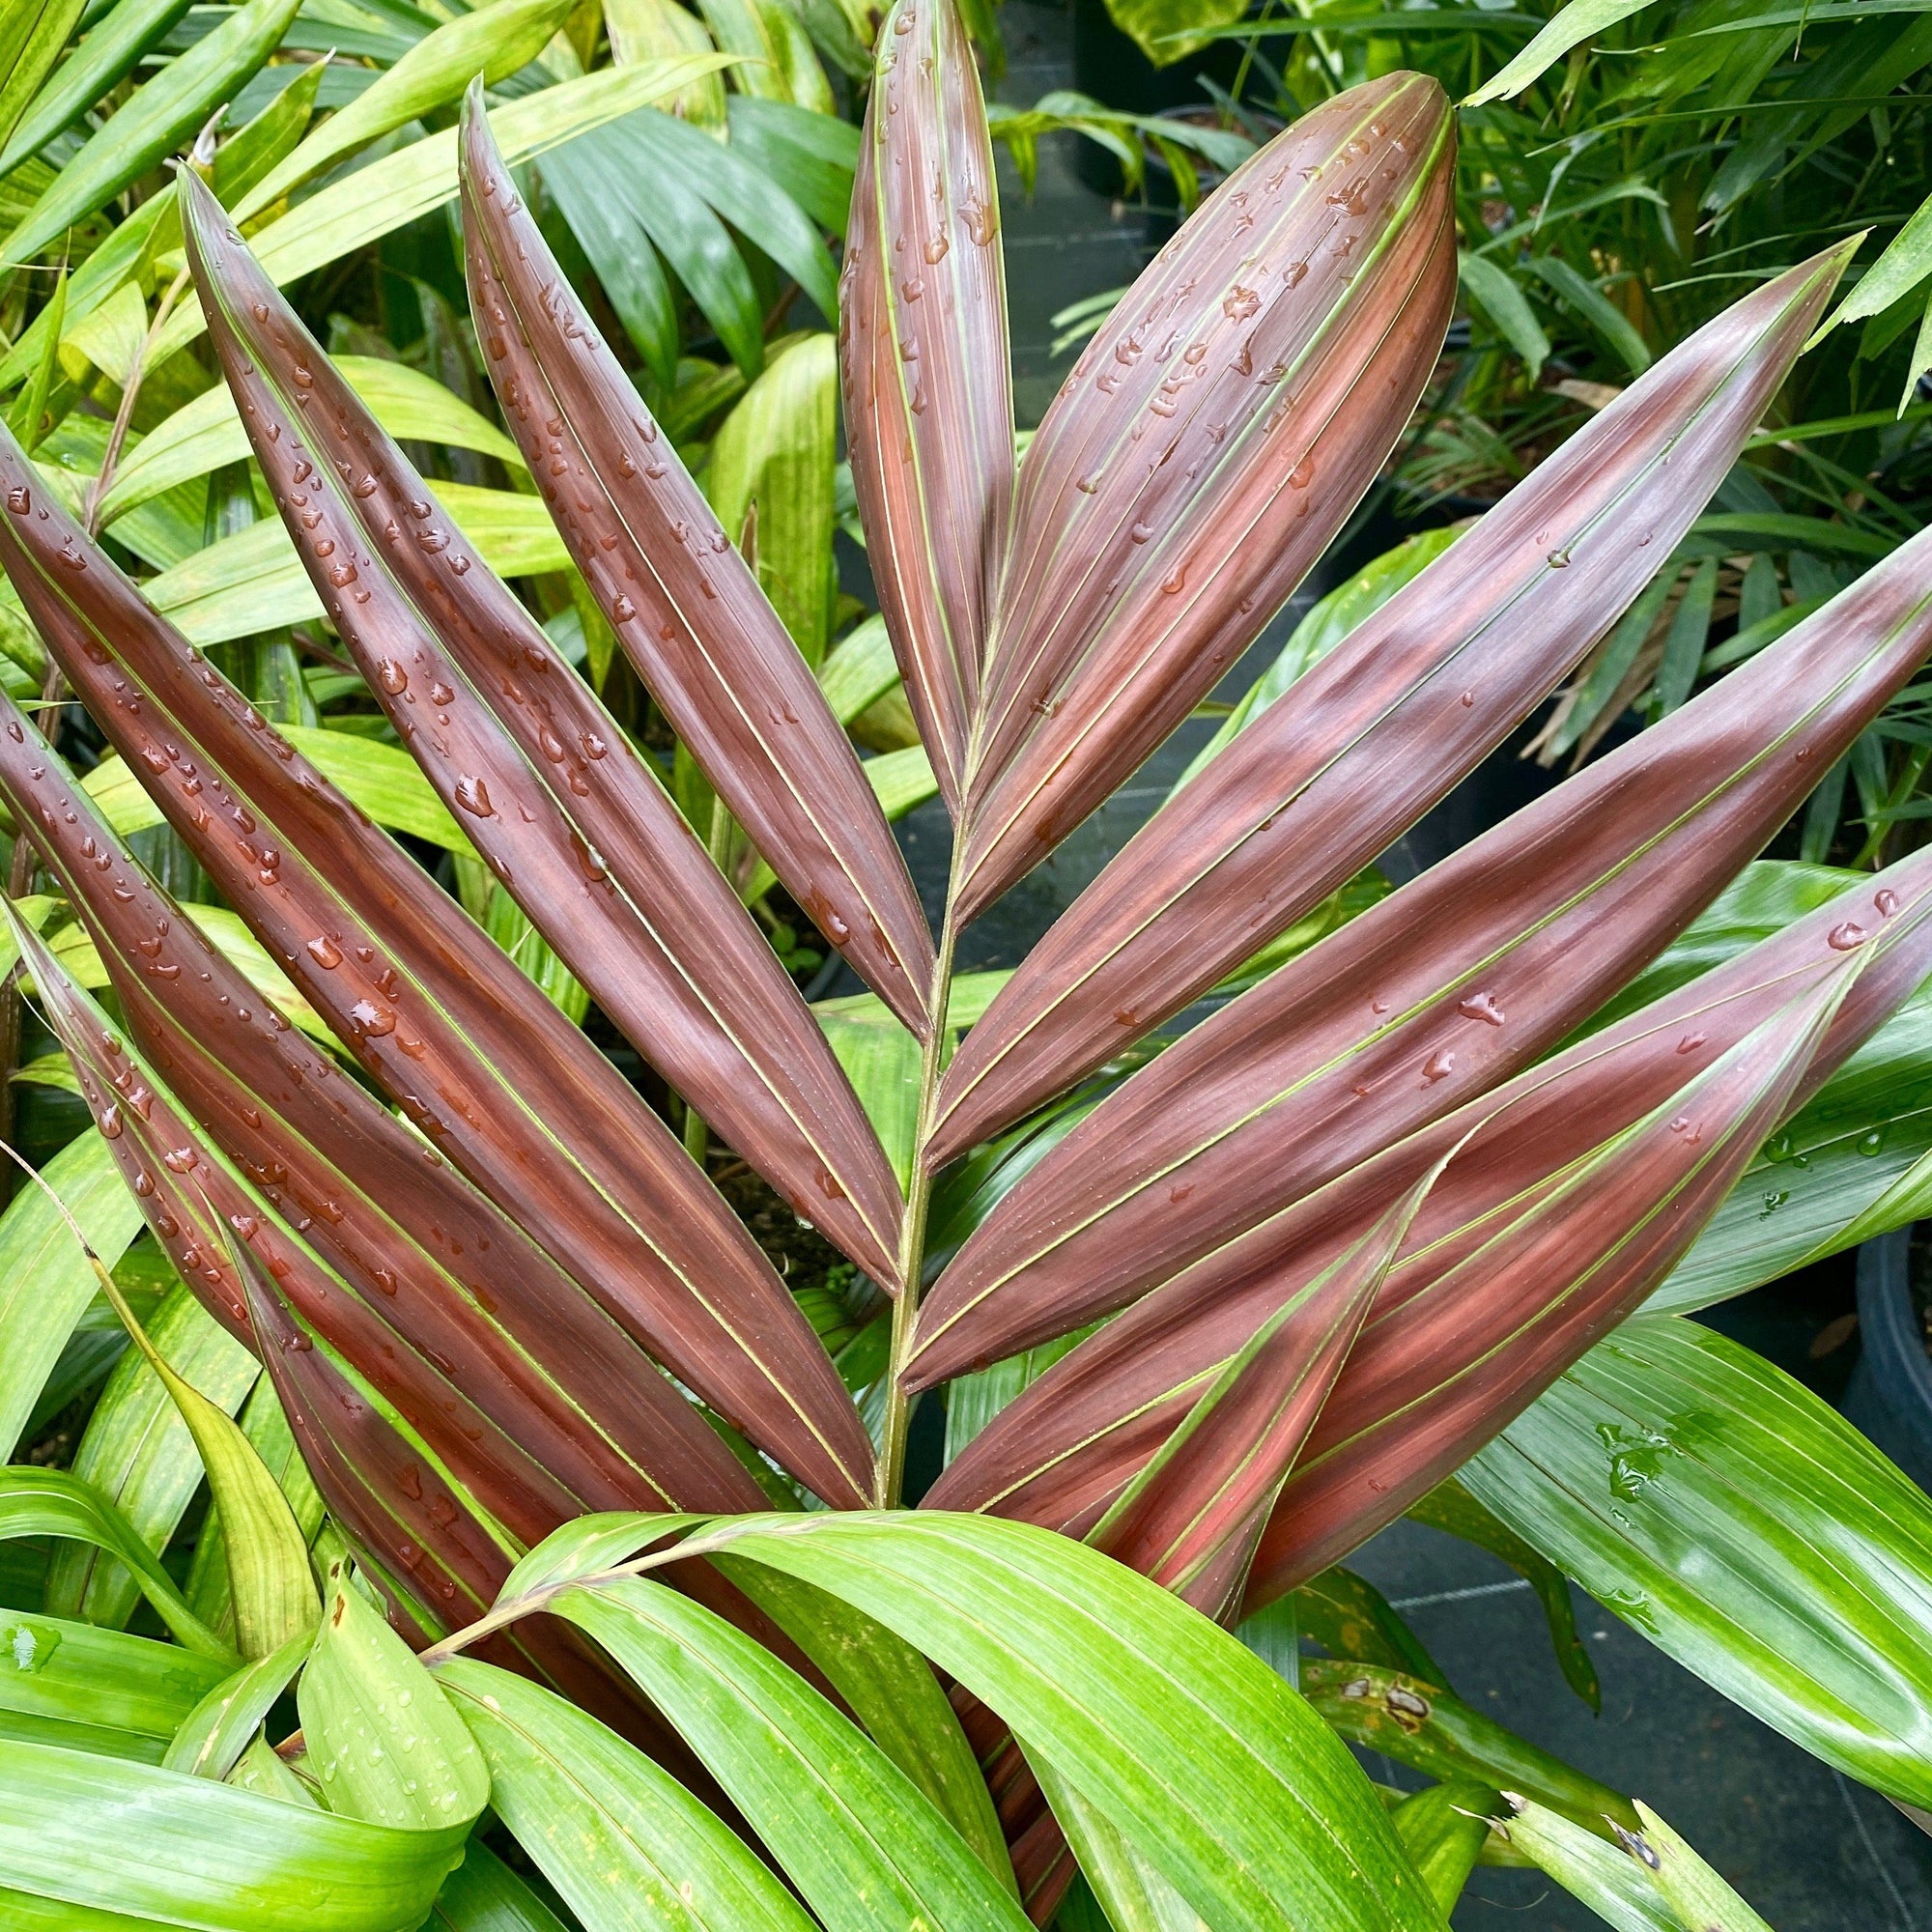 A very attractive easy to grow palm with a spectacular bright red new leaf that stays red for about 10 days